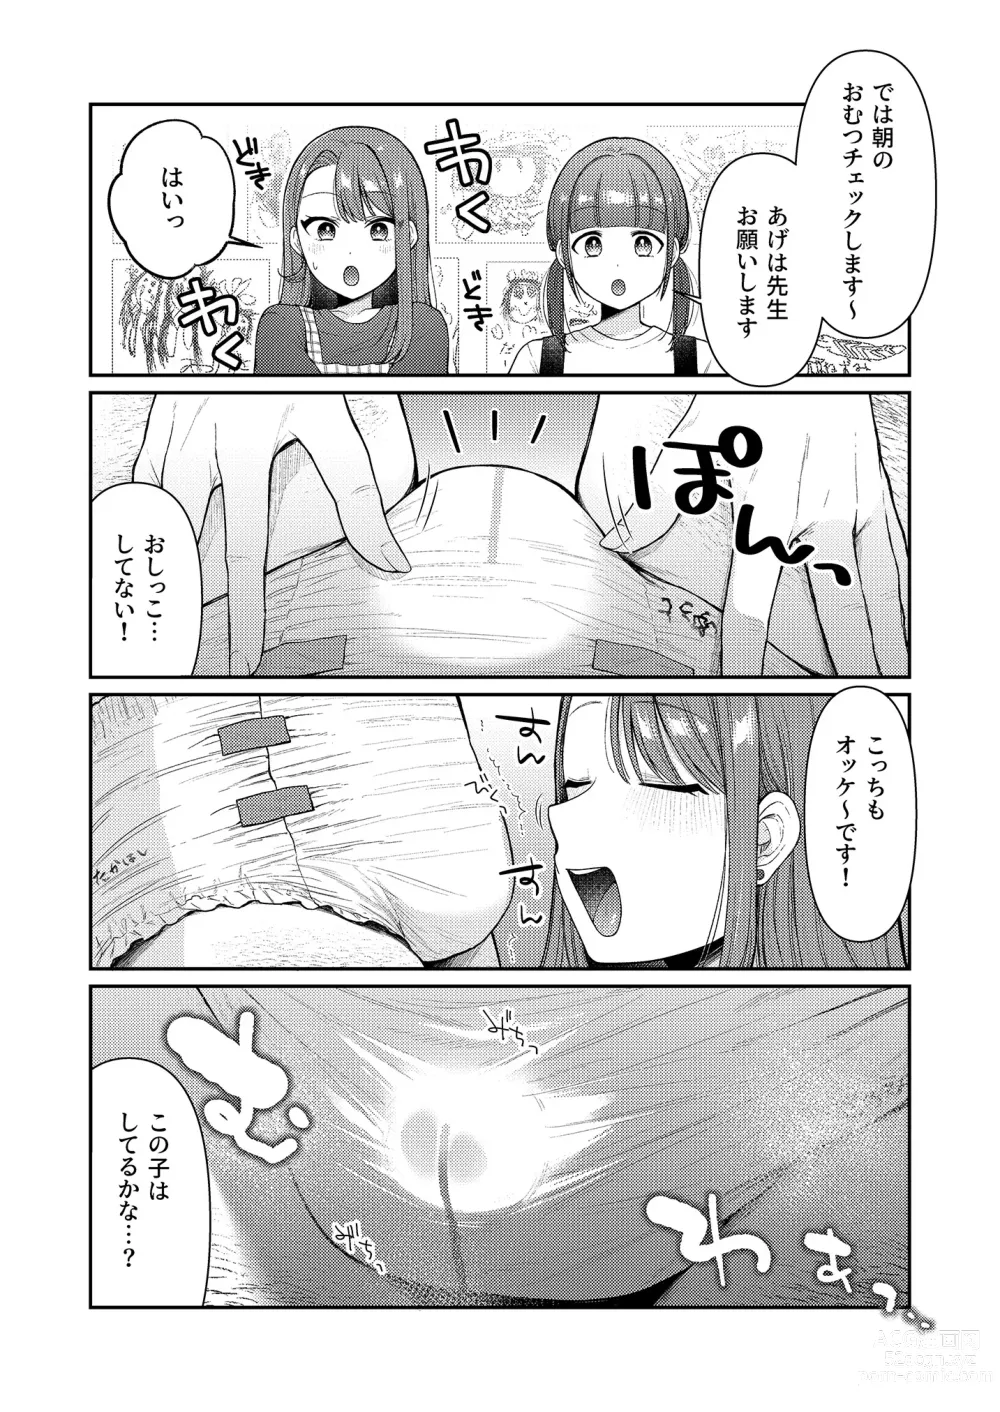 Page 5 of doujinshi Ageha tente to issho